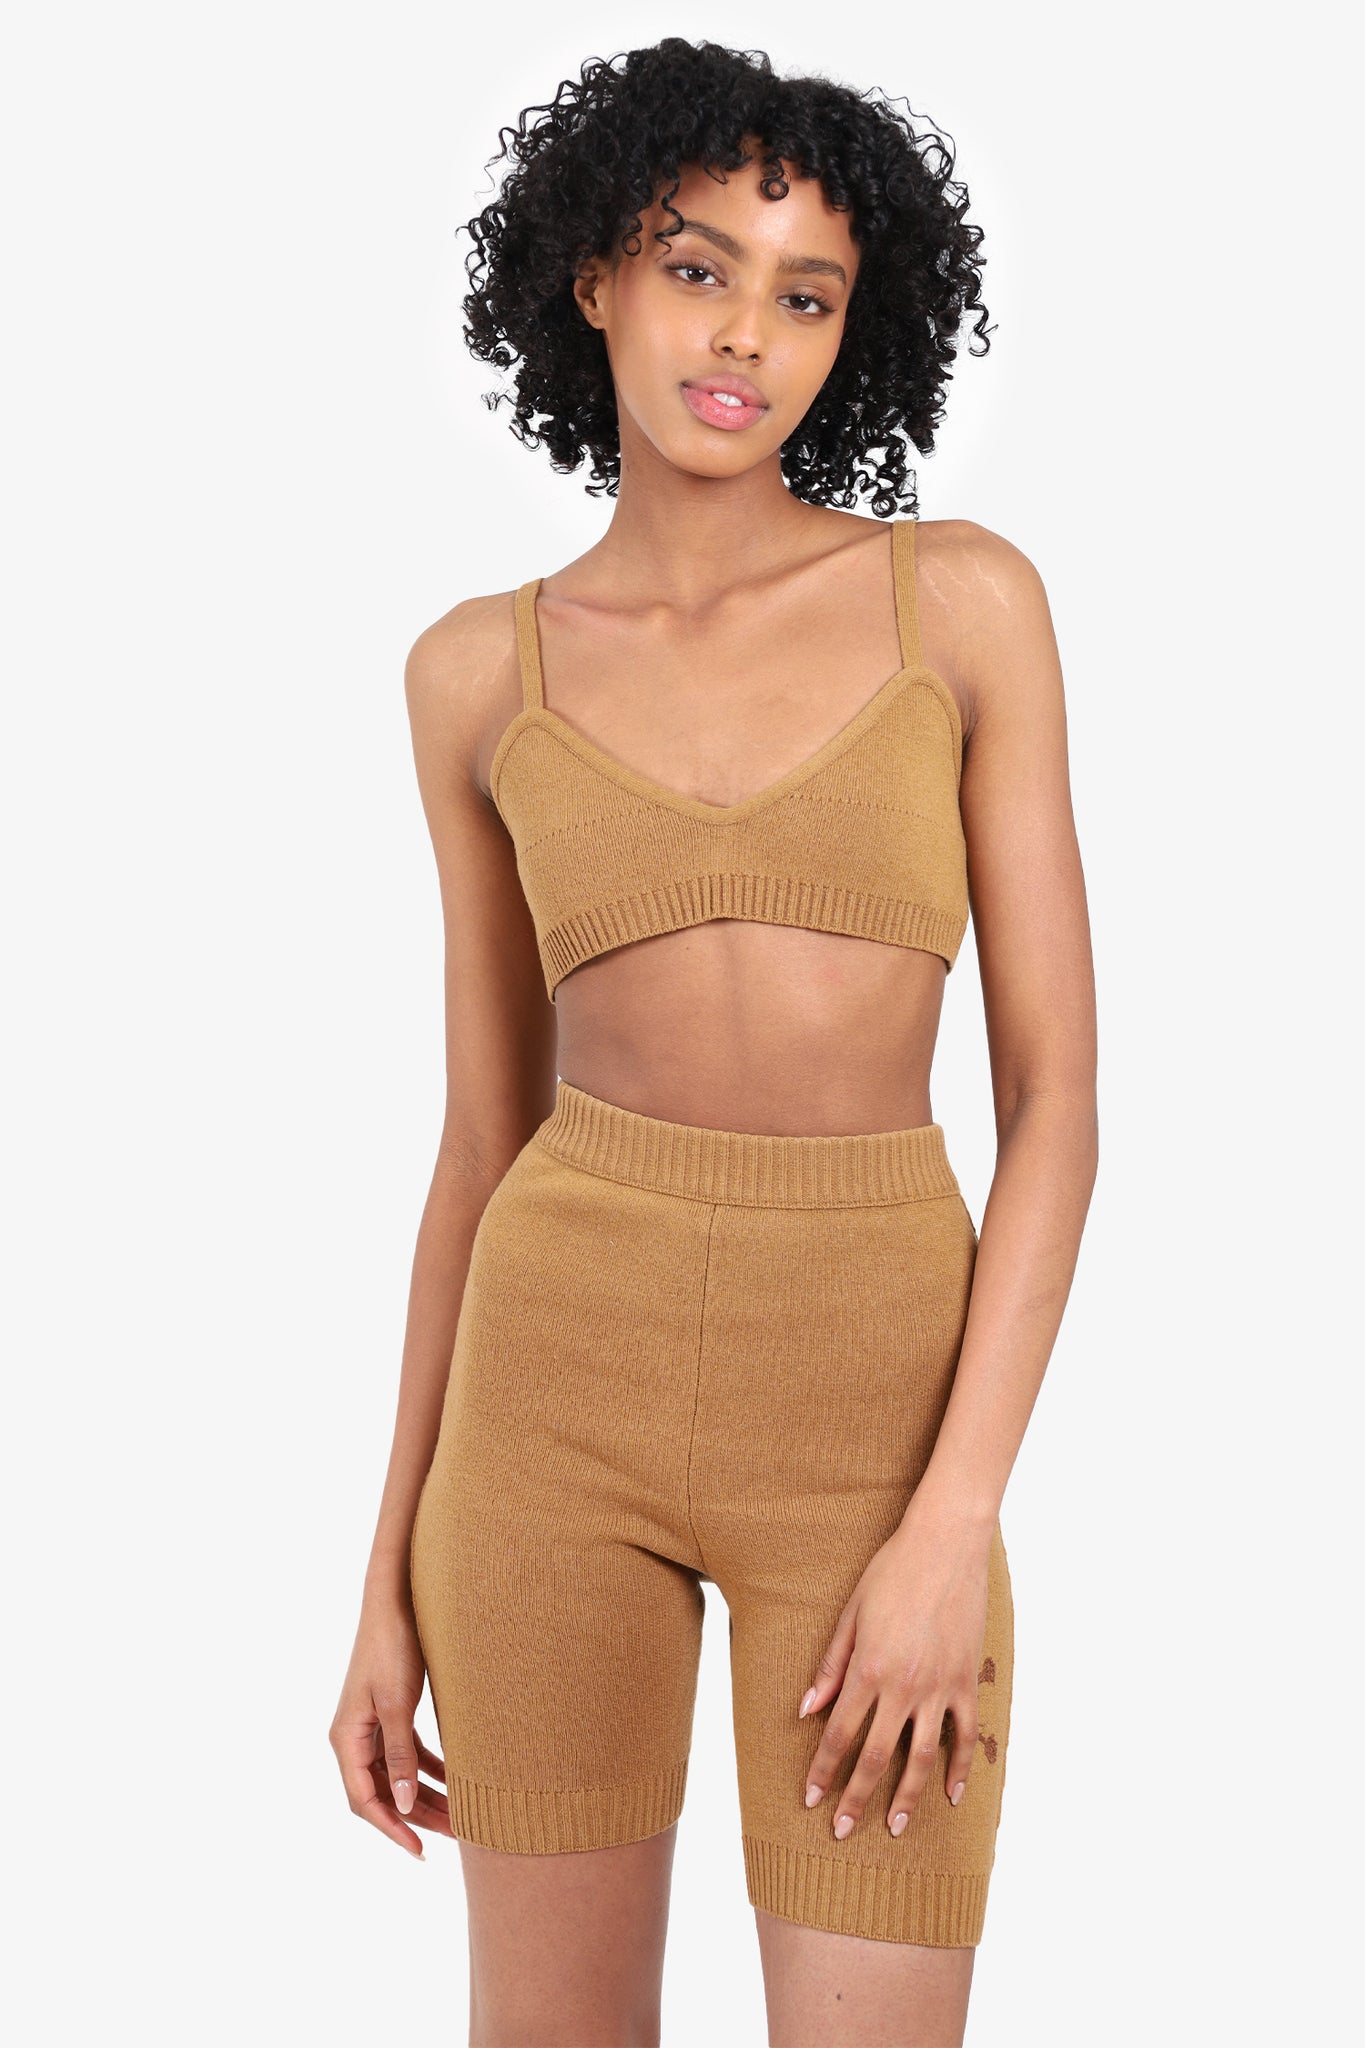 Off-White Tan Wool Knit Bra Top + Embroidered Bermuda Shorts Size